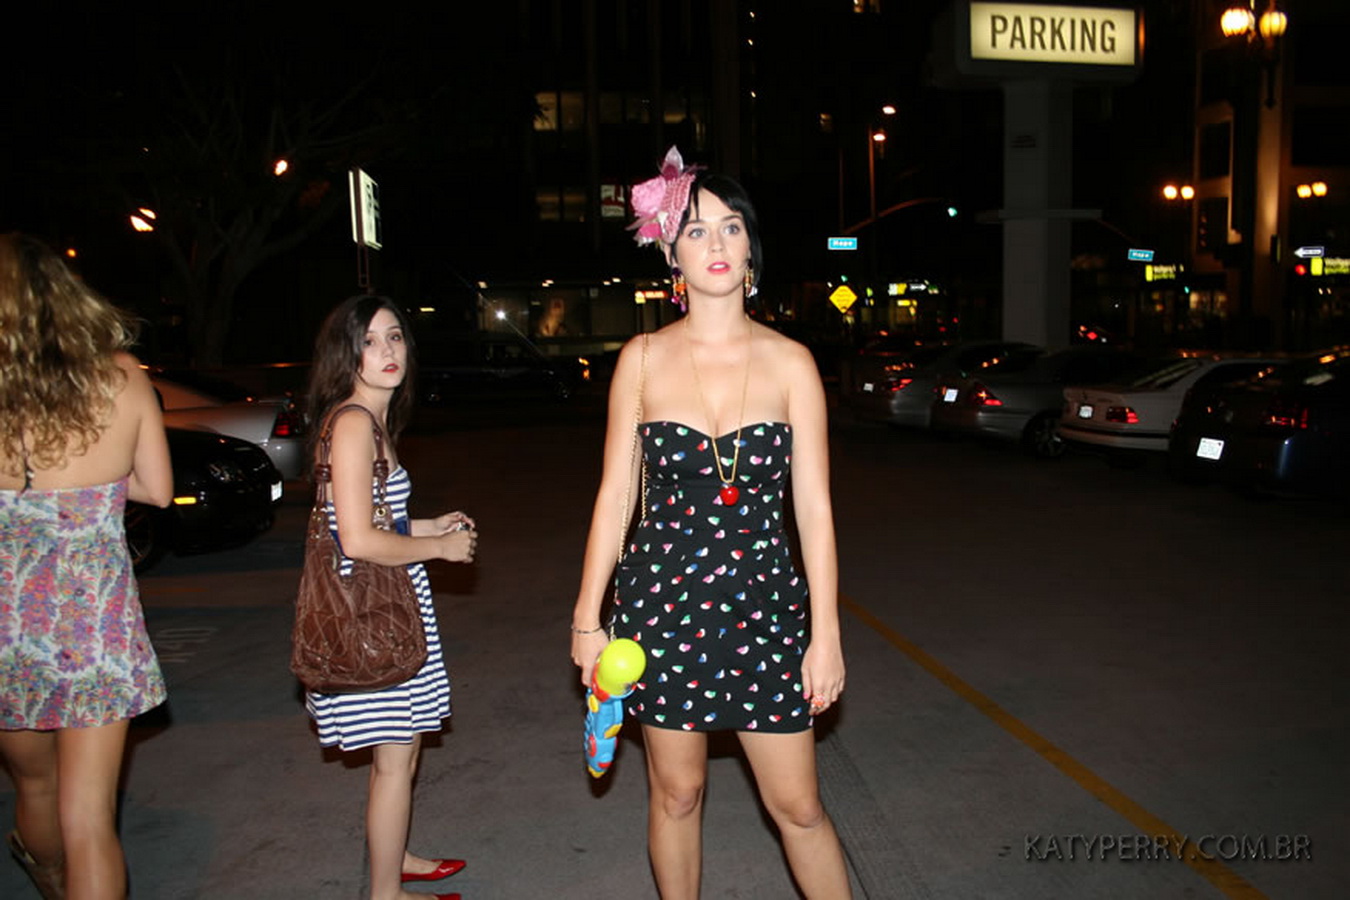 Katy_Perry_bobsslip_drunk_cleavage_downblouse_upskirt_nipslip_at_her_birthday_2007_party_99x_HQ_15.jpg